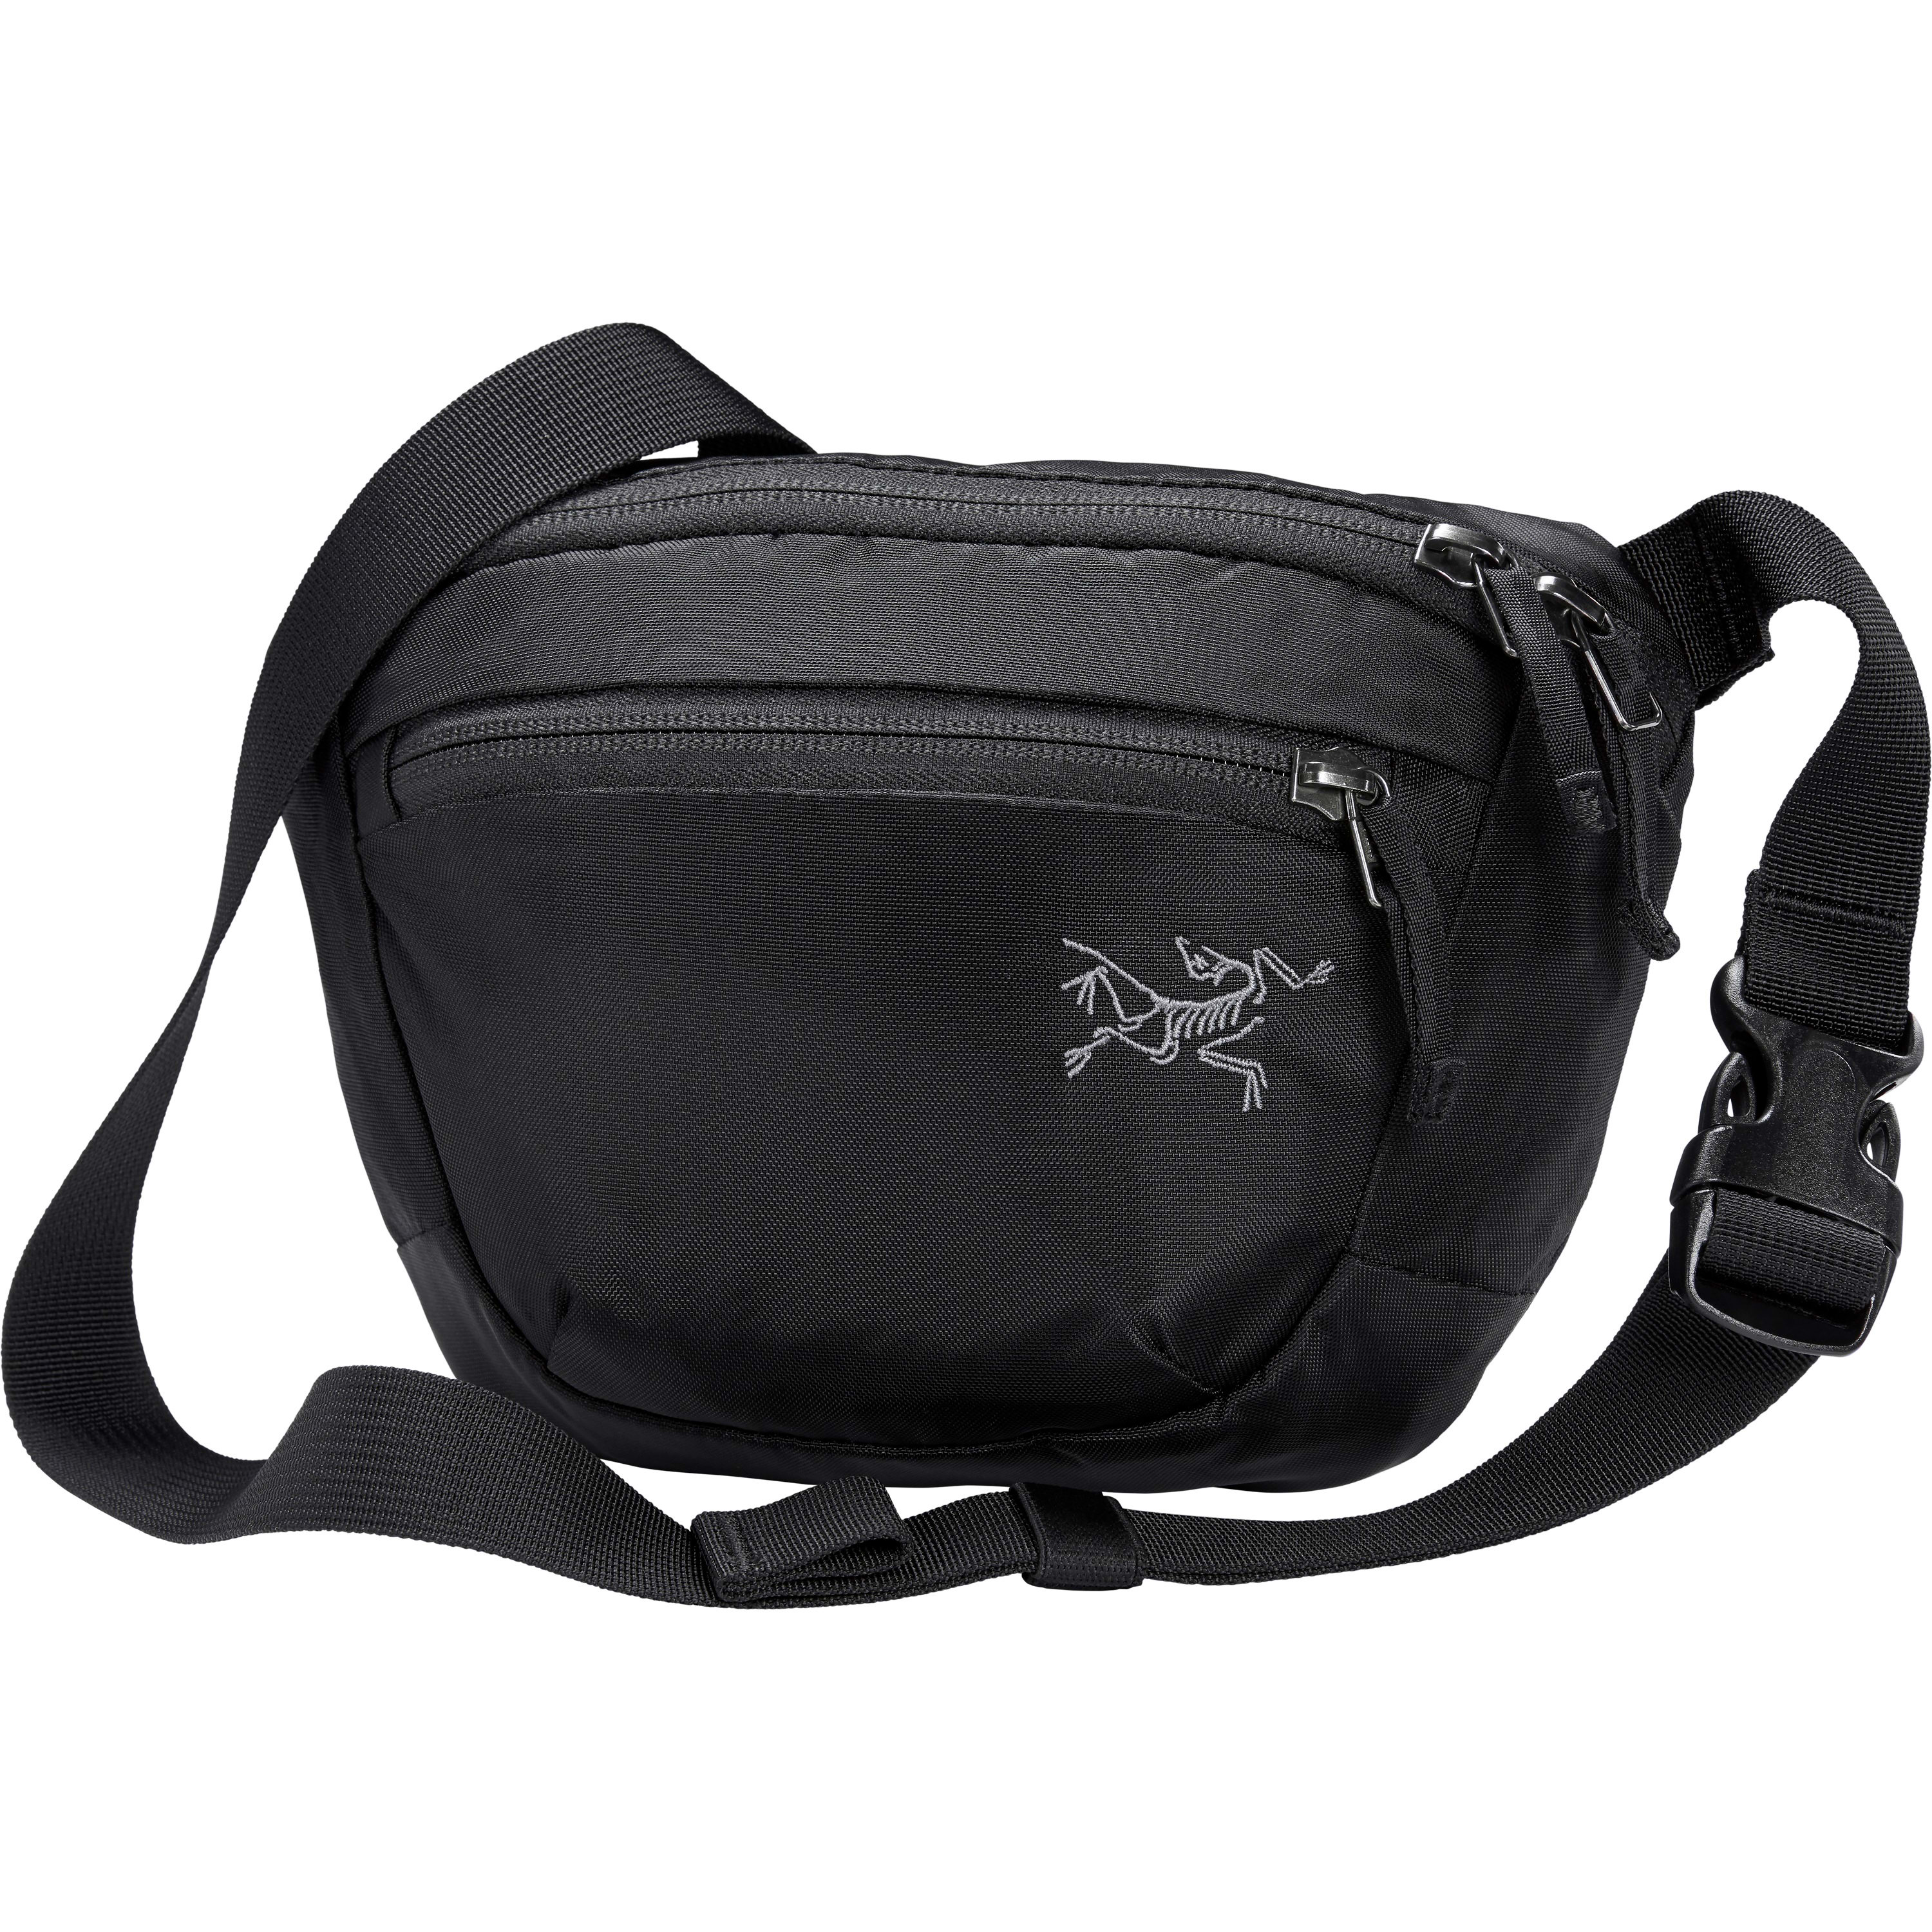 Buy Arc'teryx Mantis 1 Waistpack from Outnorth